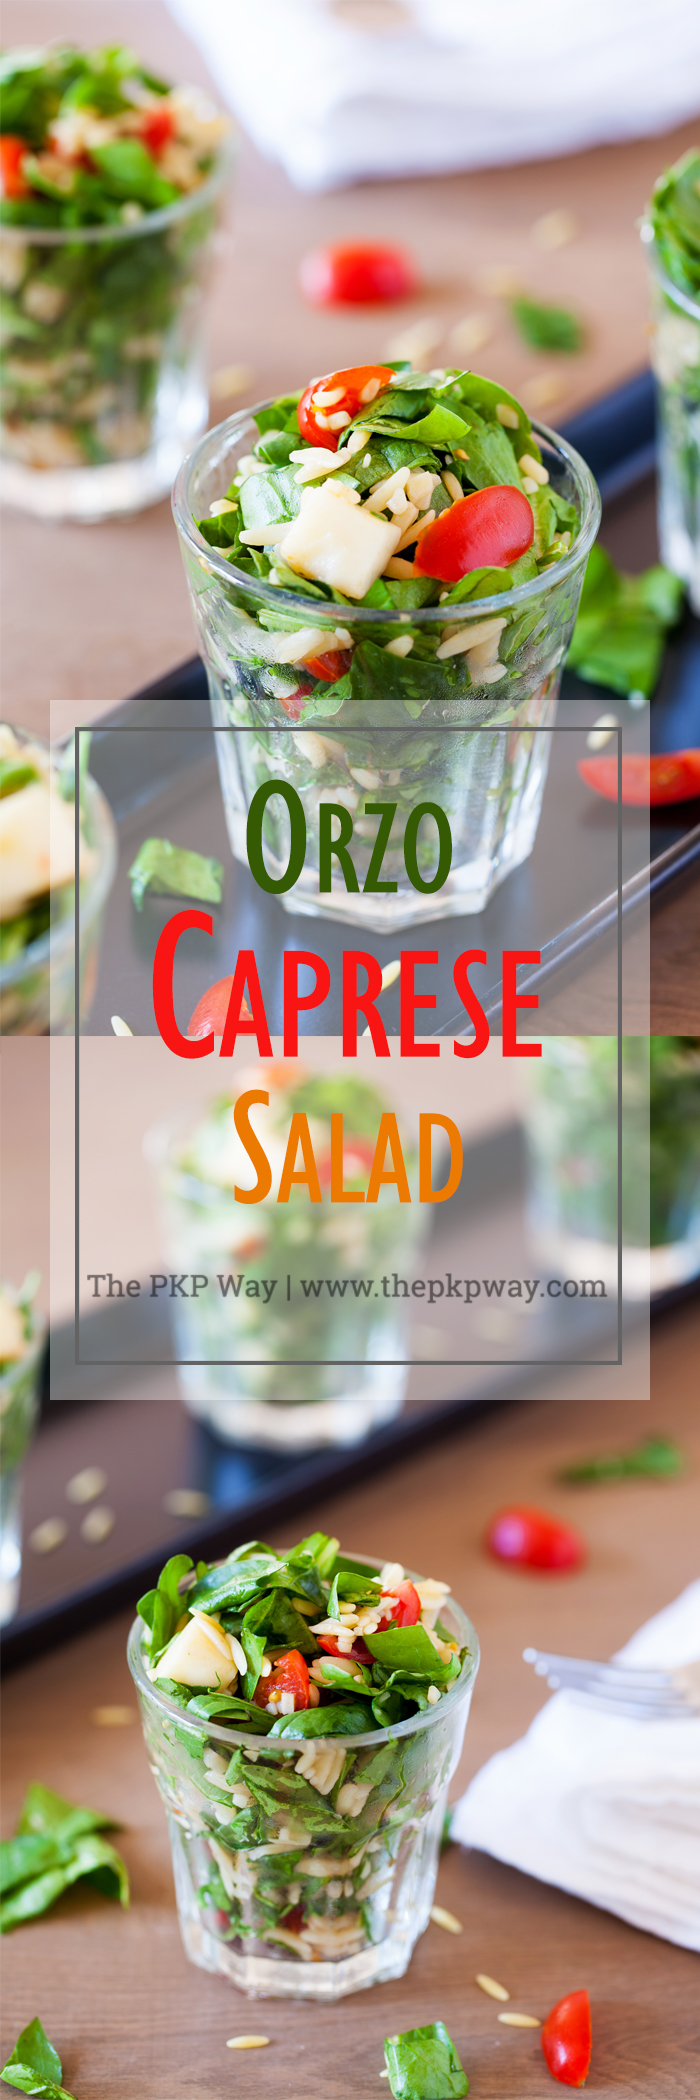 Classic caprese ingredients (basil, mozzarella, tomatoes, and balsamic vinaigrette) modernized into a salad with spinach and orzo pasta. 